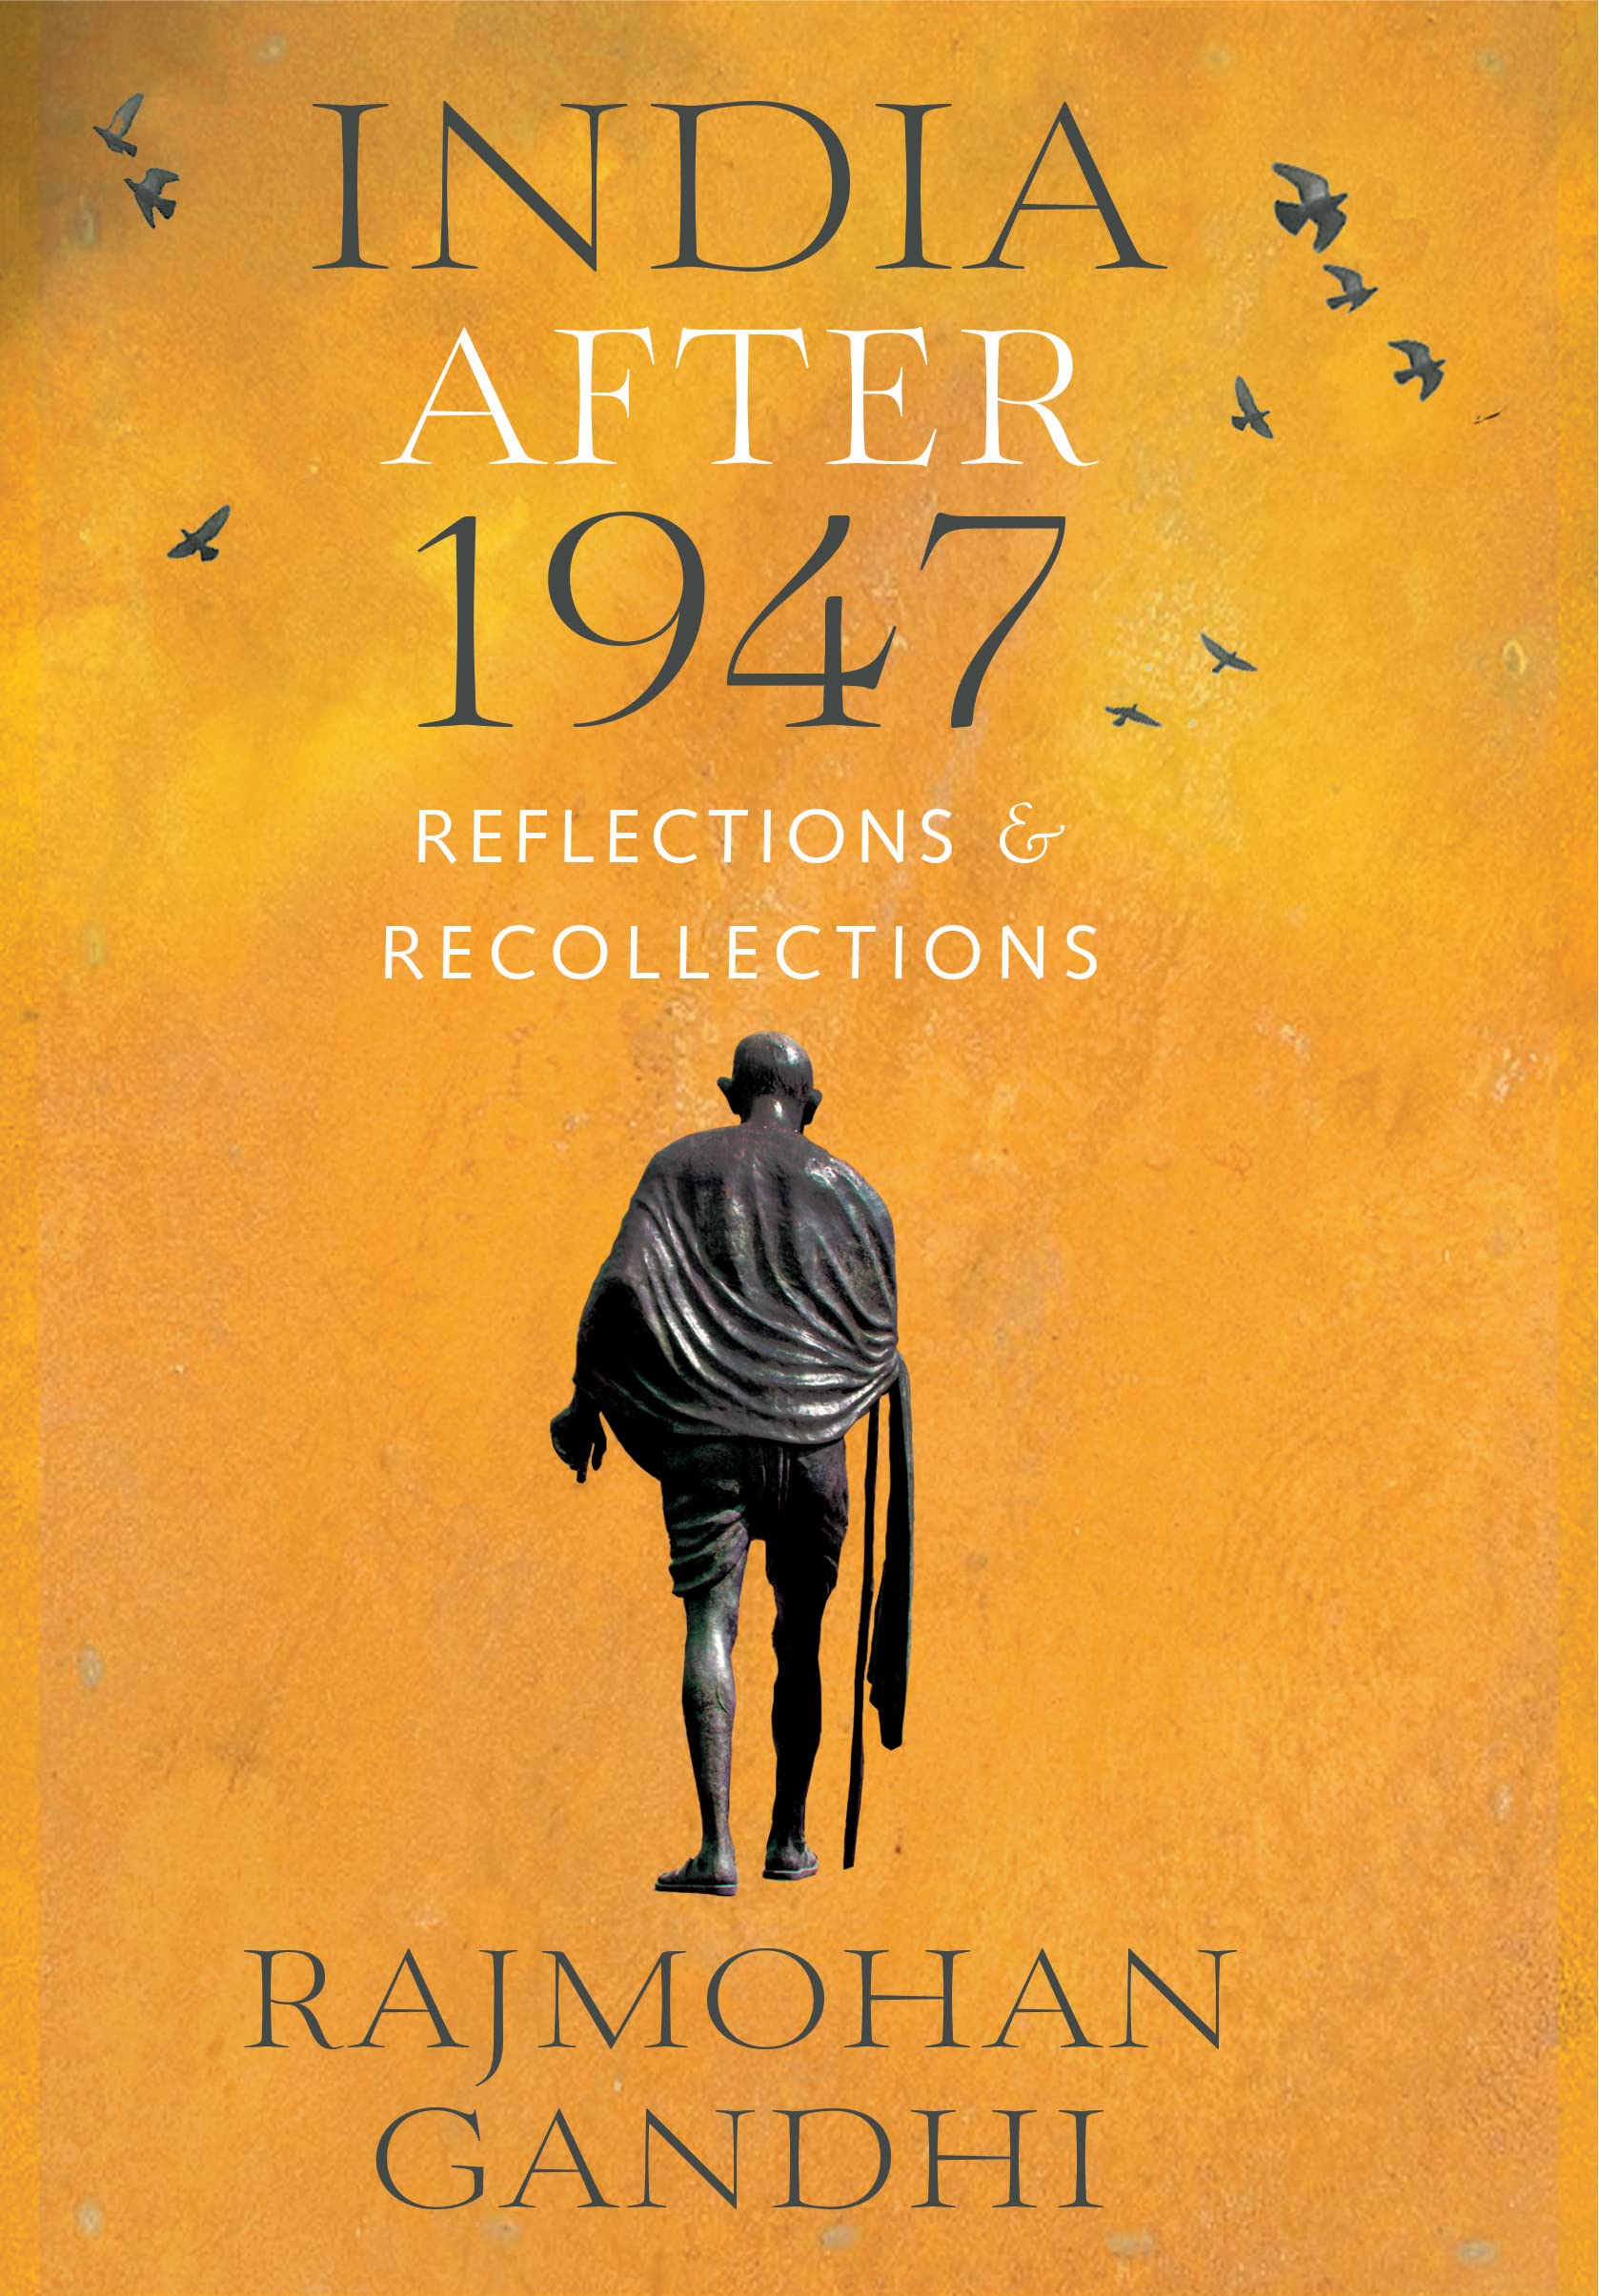 India After 1947: Reflections & Recollections book cover